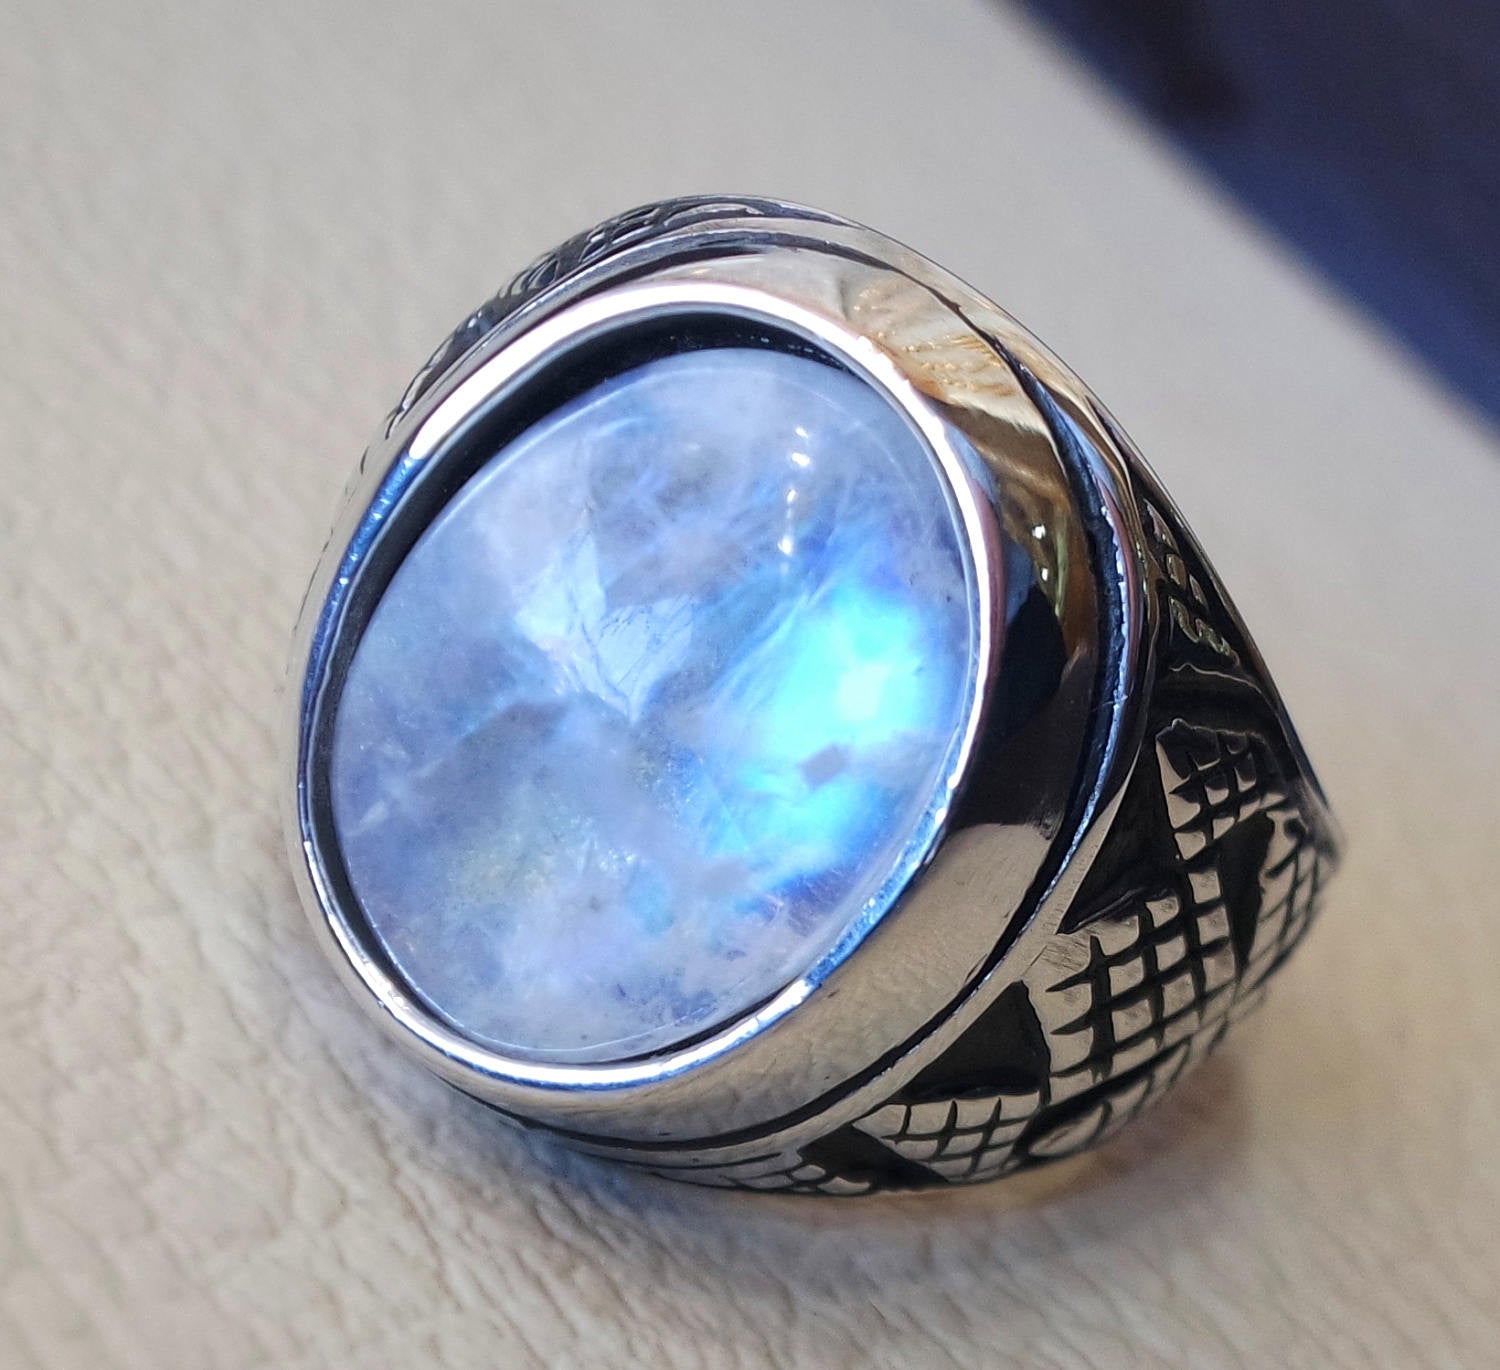 flashy moonstone men ring  natural stone dur al najaf sterling silver 925 stunning genuine gem two ottoman arabic style jewelry all sizes